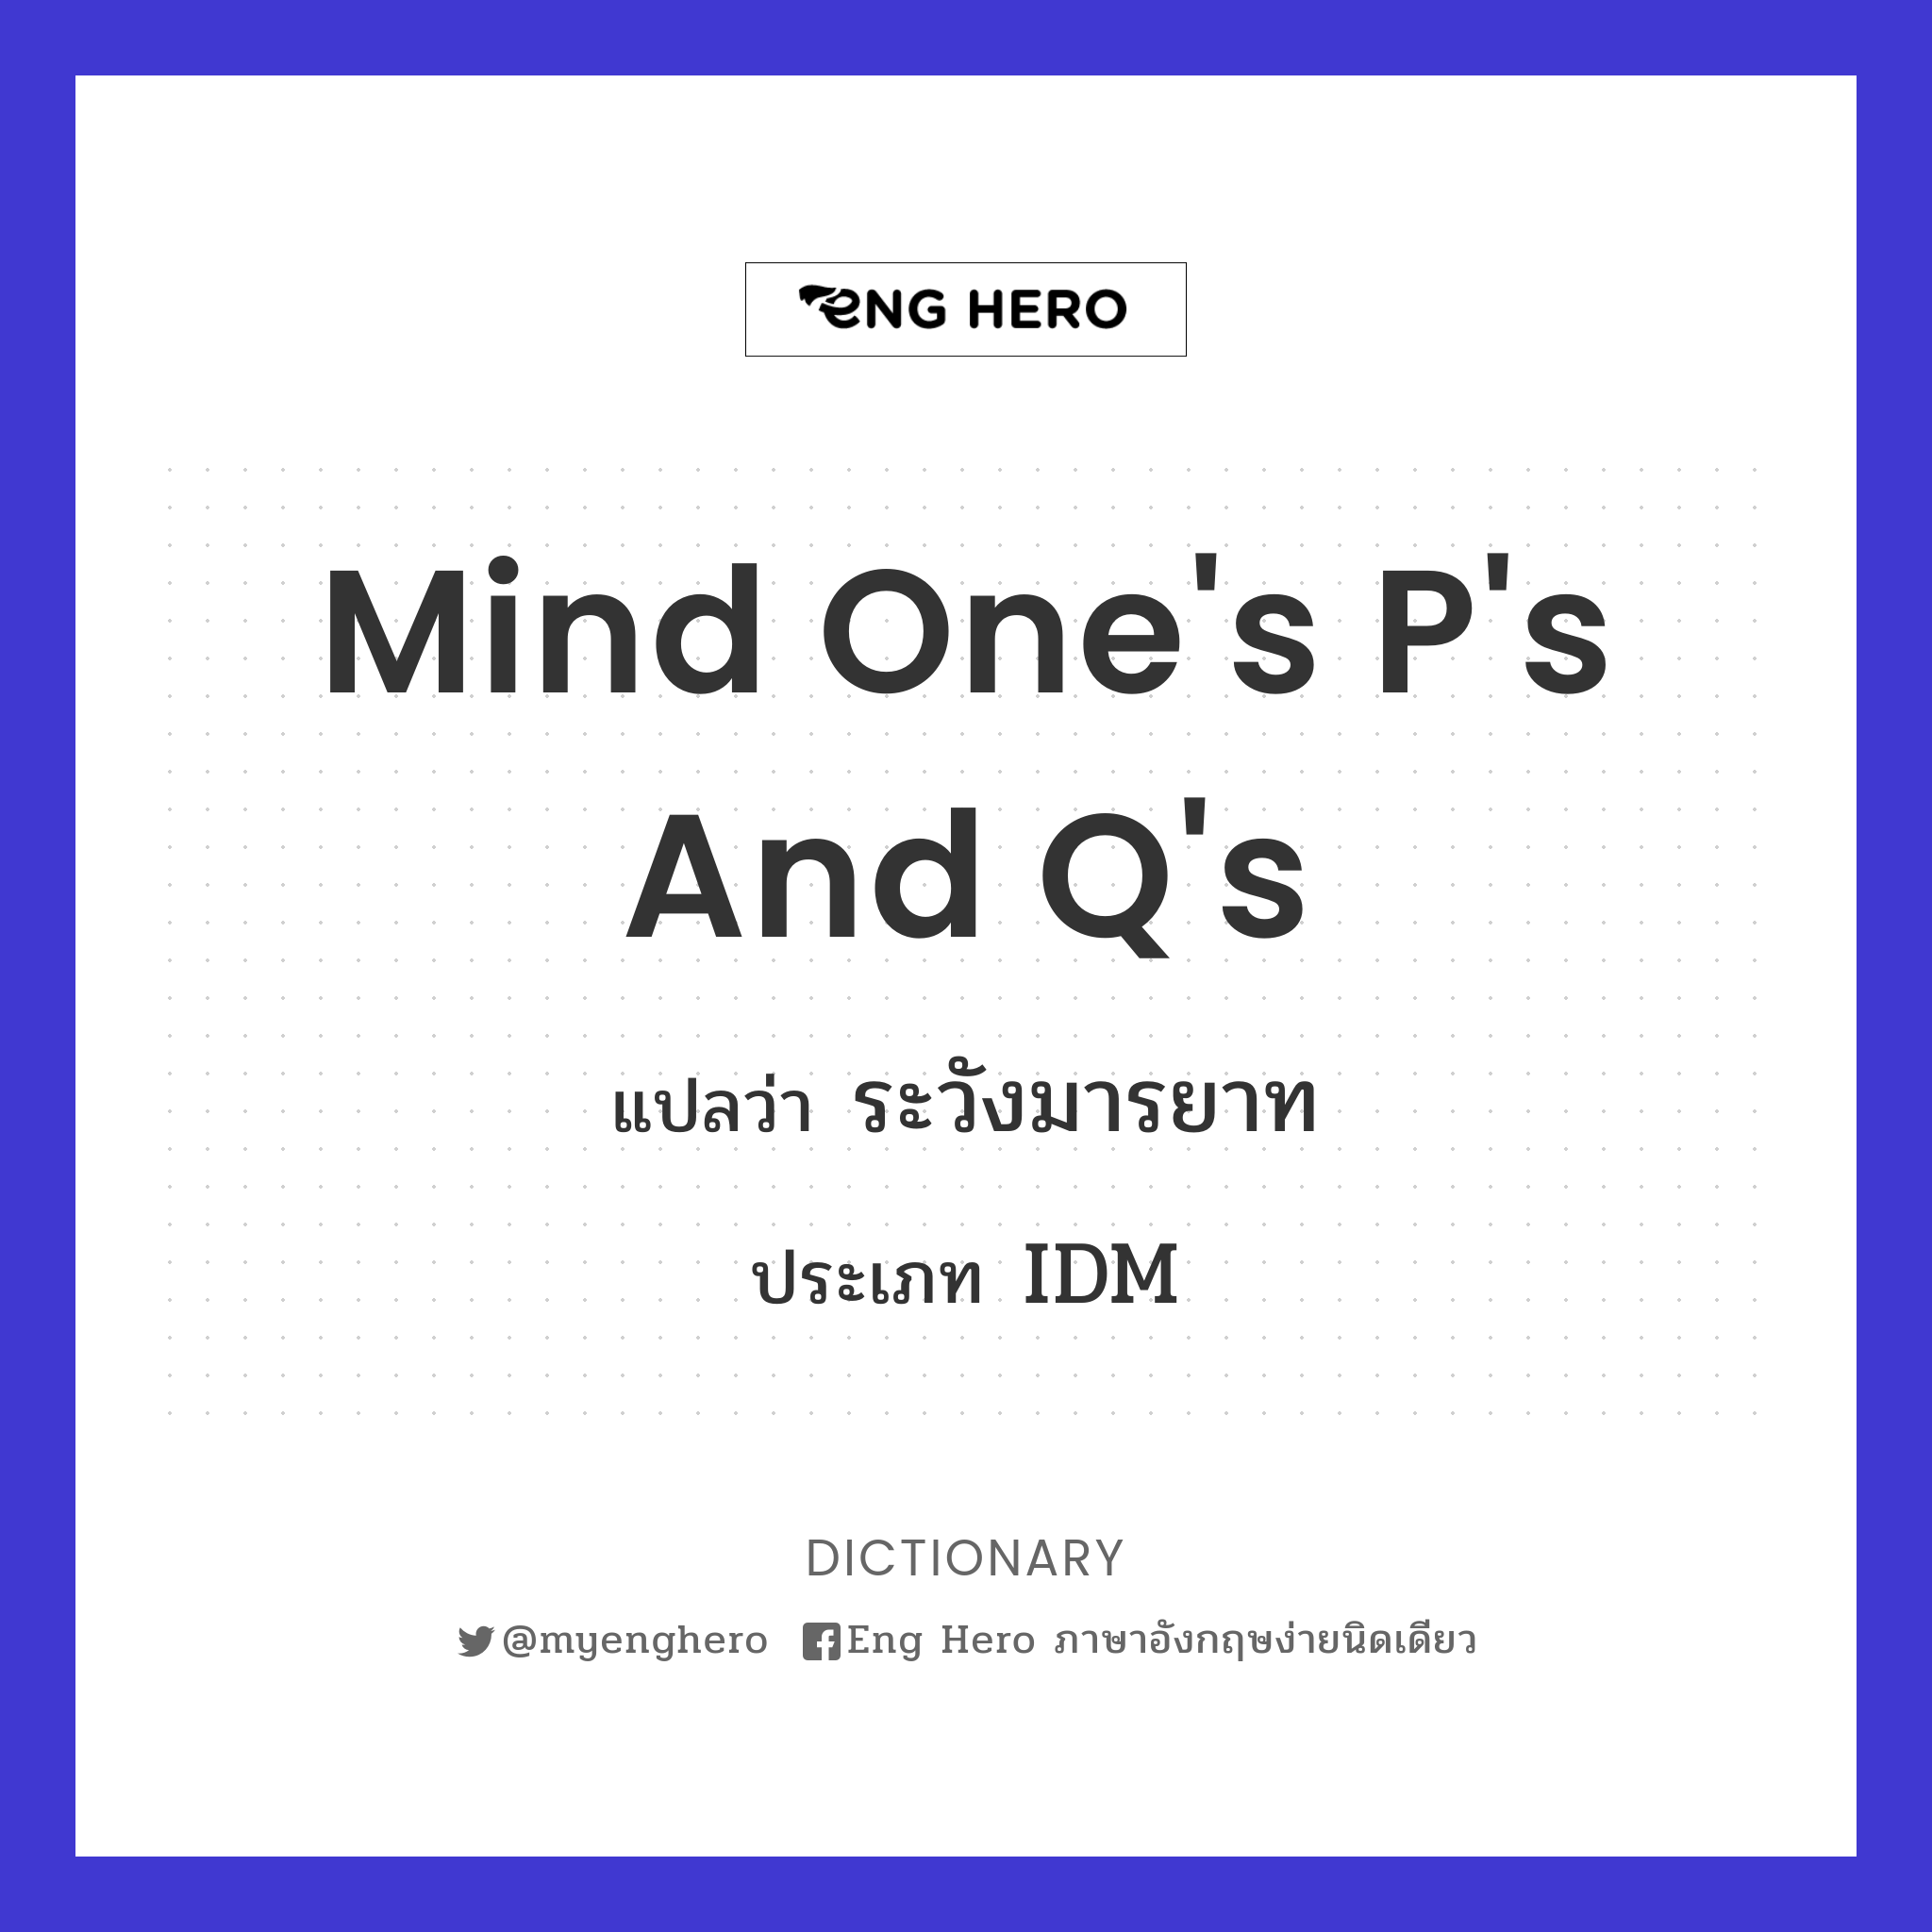 mind one's P's and Q's